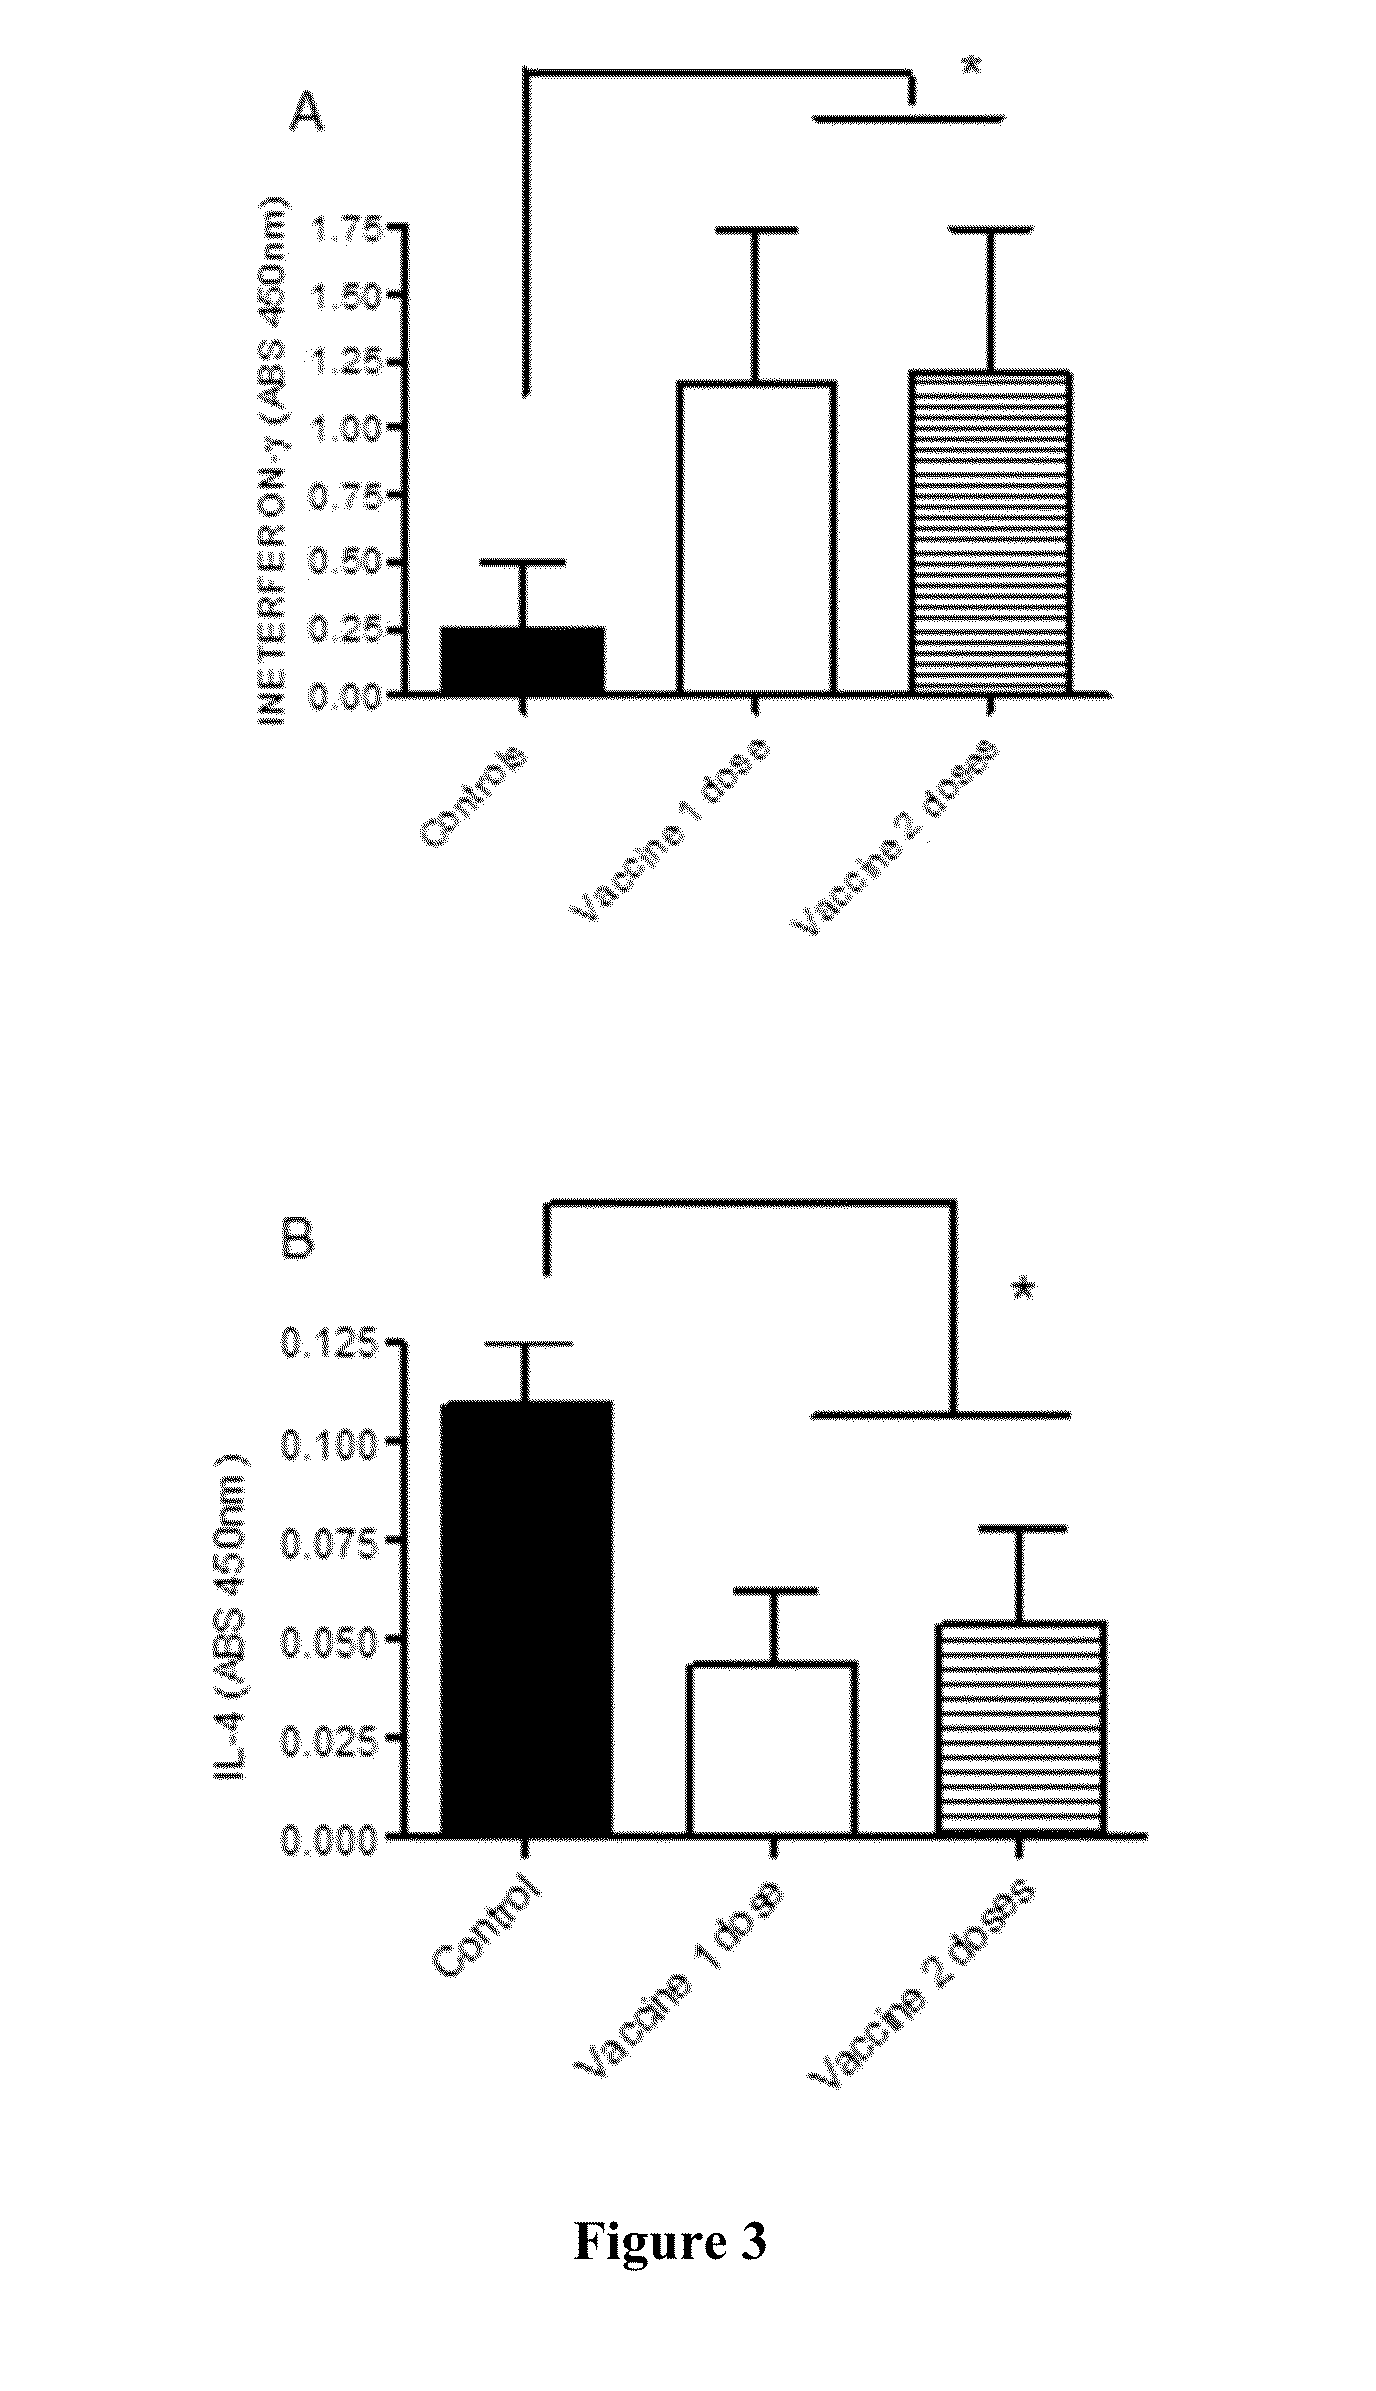 Vaccines for the treatment of cancer and compositions for enhancing vaccine efficacy